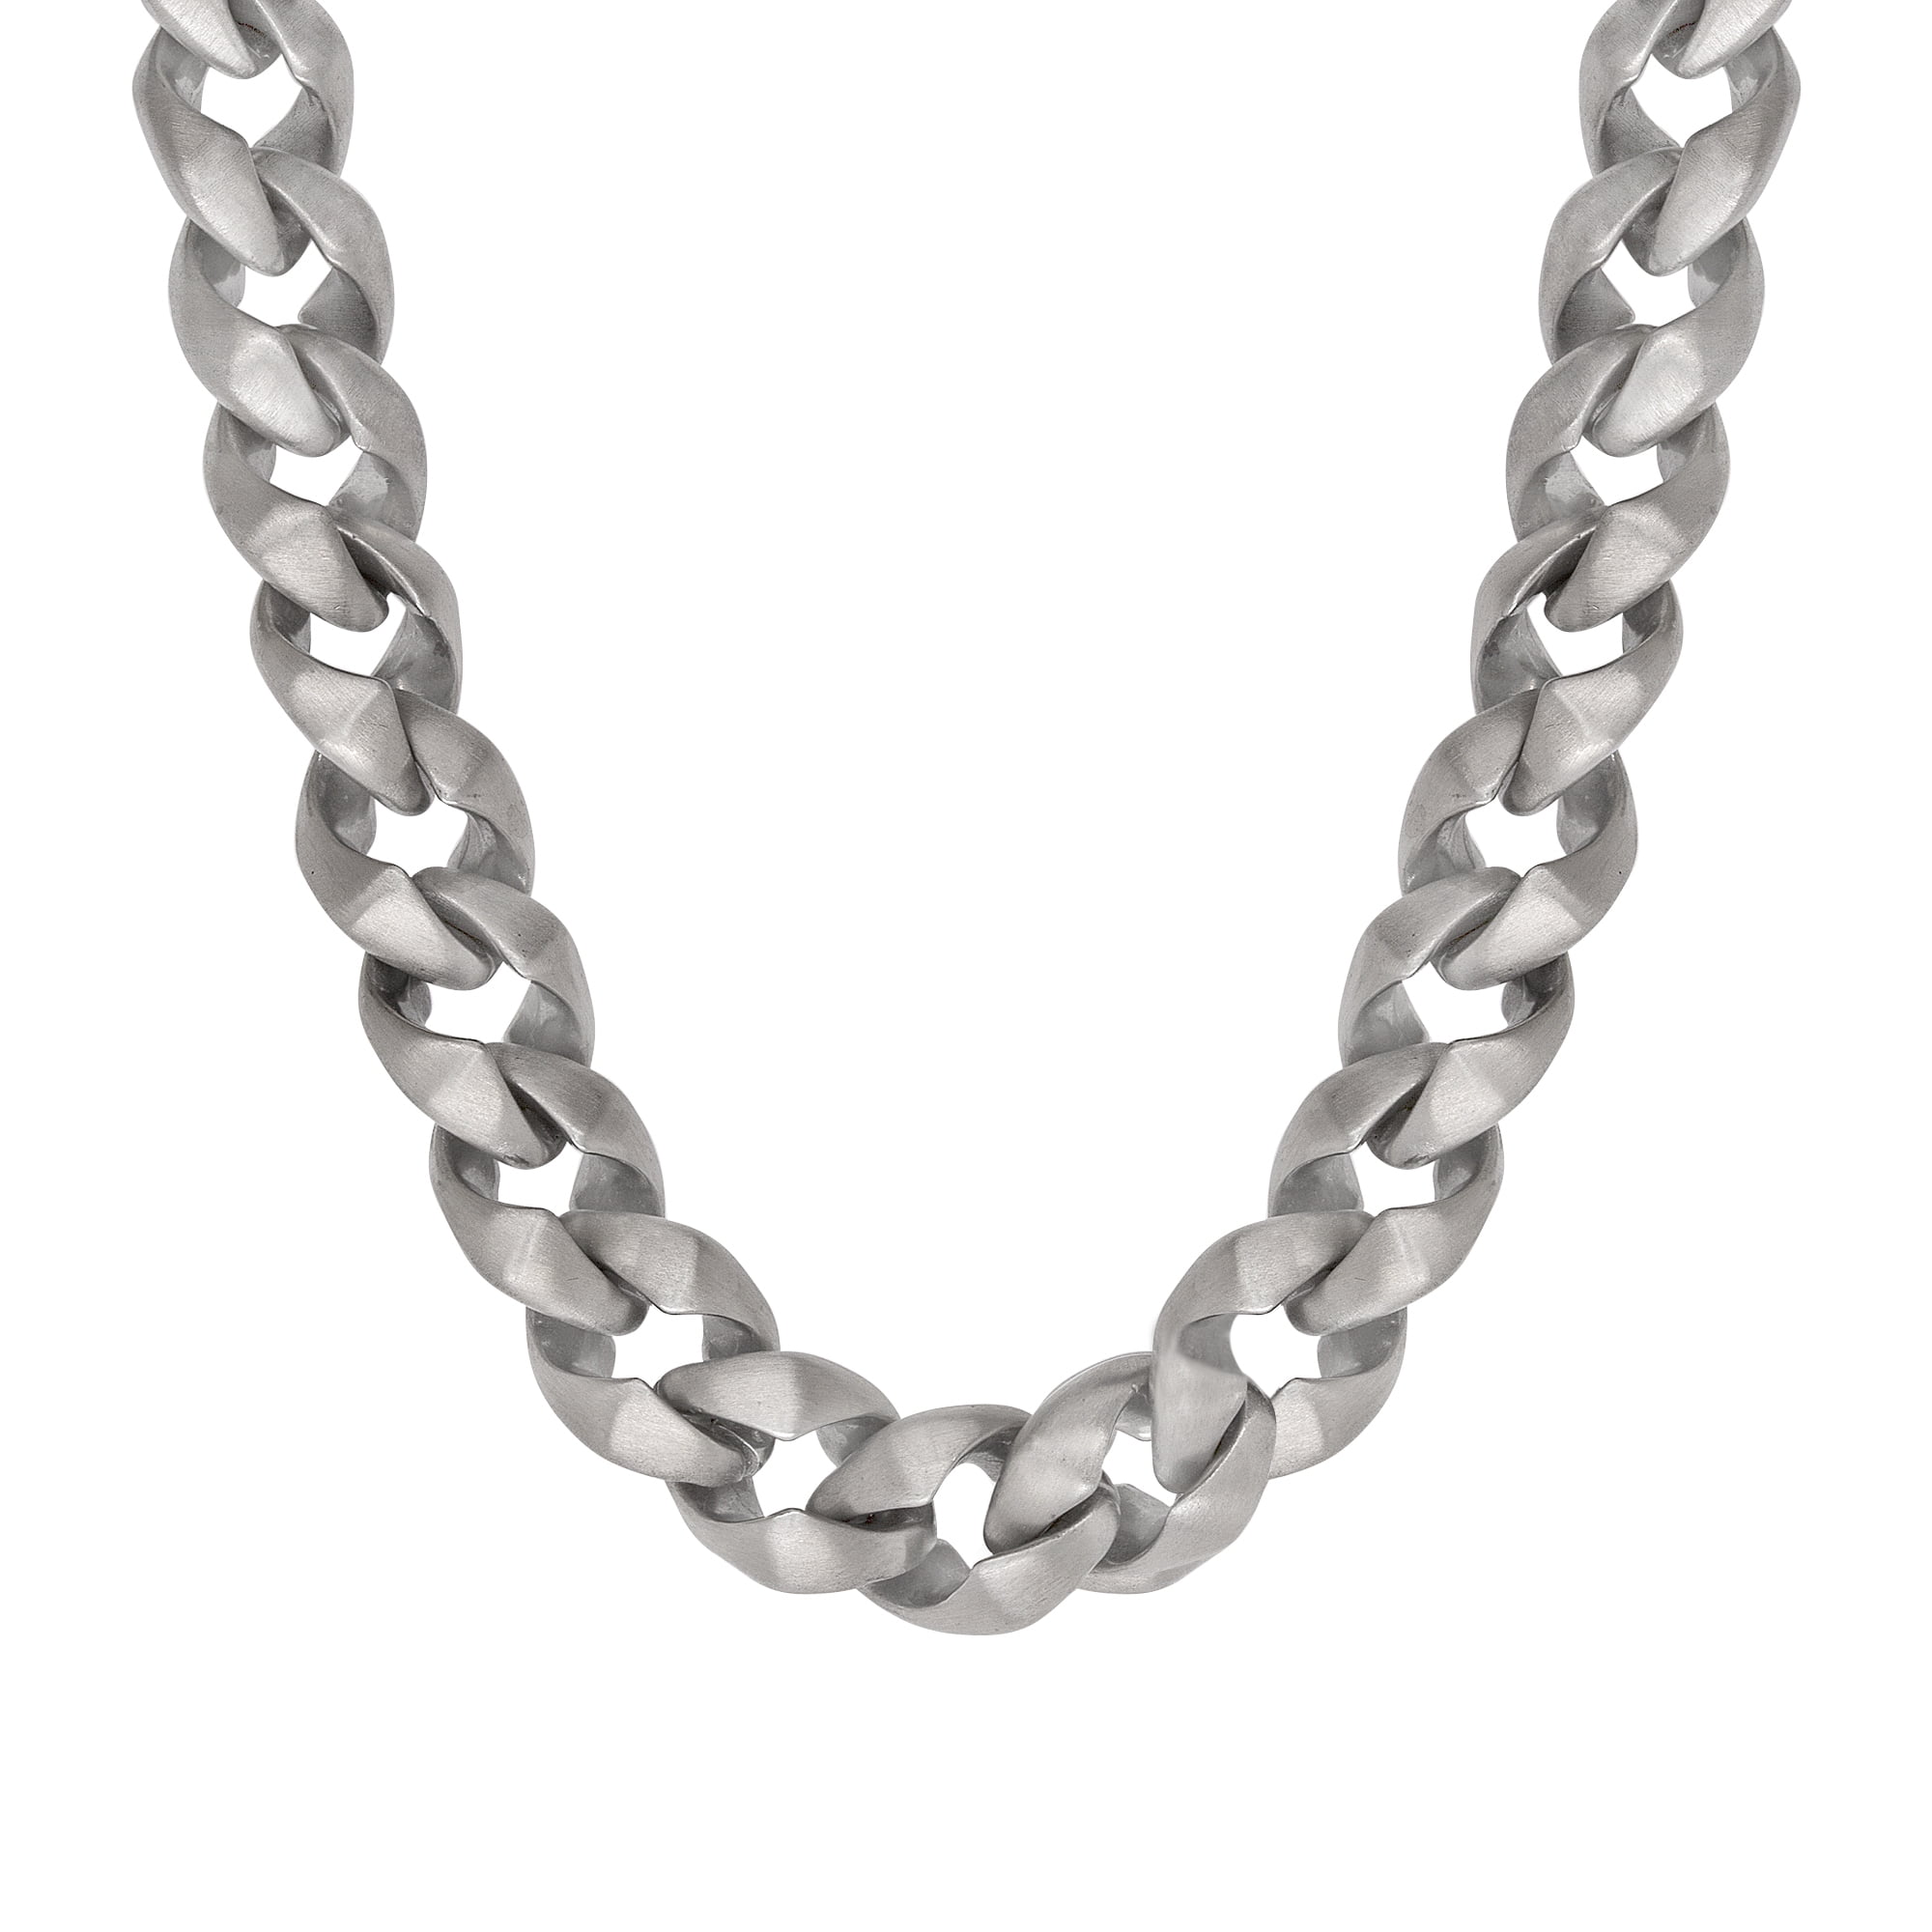 American Steel Stainless Steel IP-Plated Gun Metal Finish Curb Chain ...